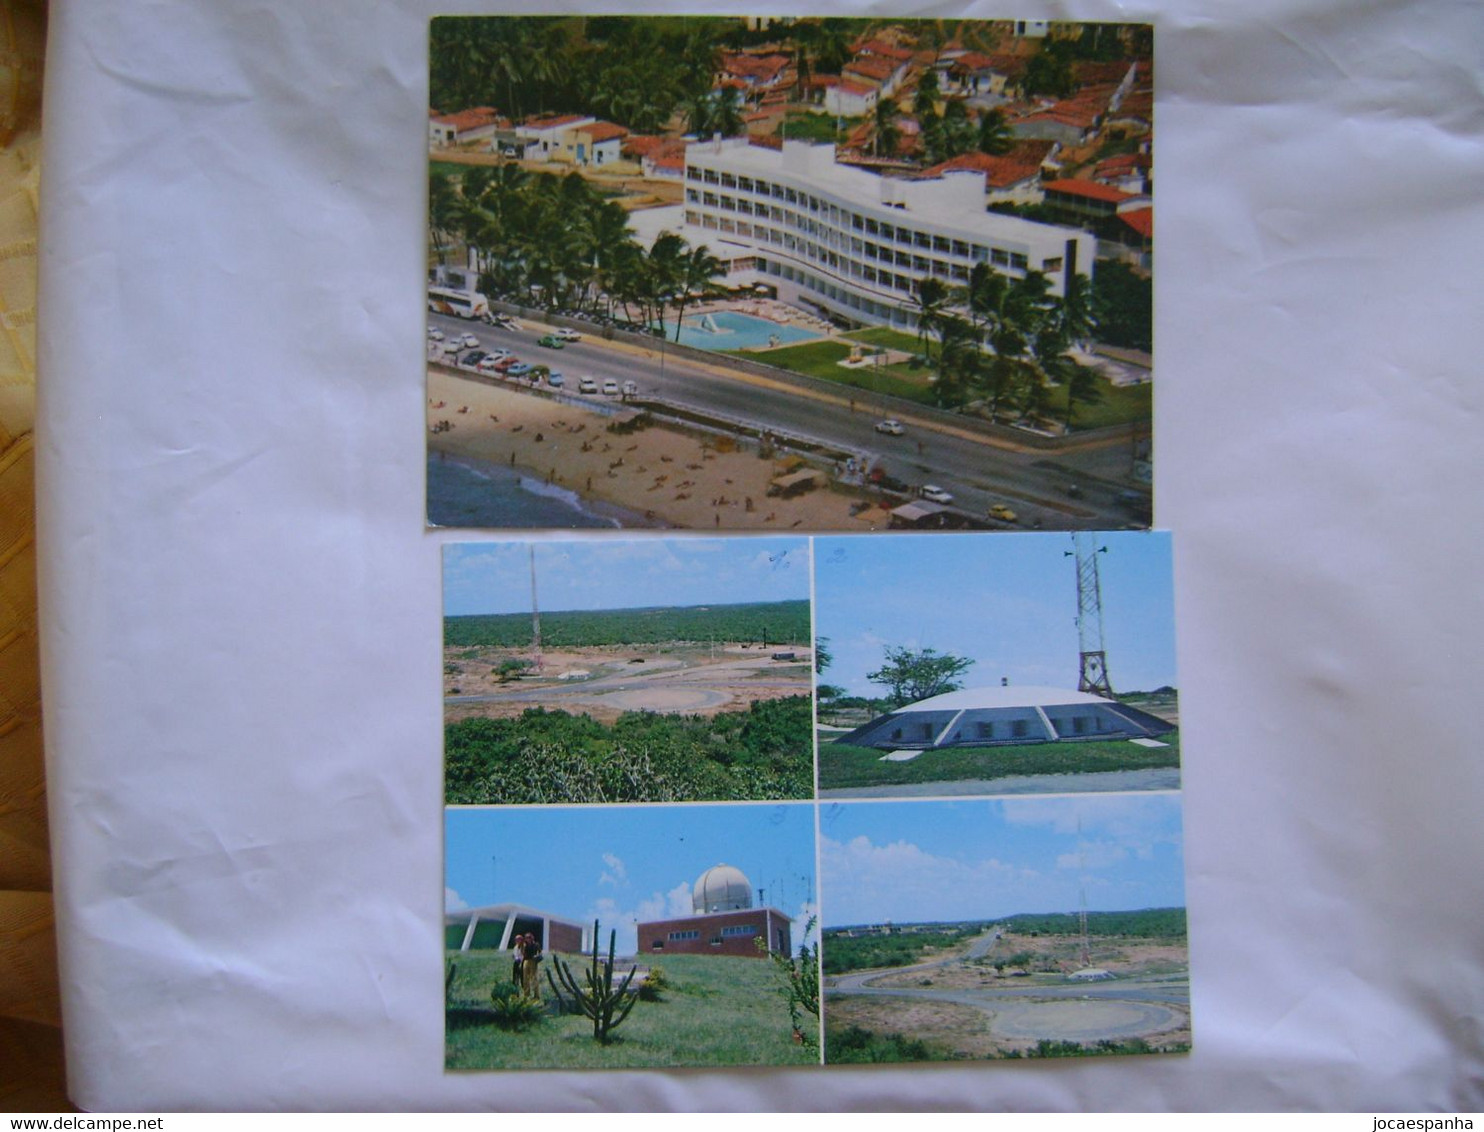 BRAZIL / BRASIL - 2 POST CARDS HOTEL AND BARREIRA DO INFERNO IN NATAL / RN IN 197? IN THE STATE - Natal